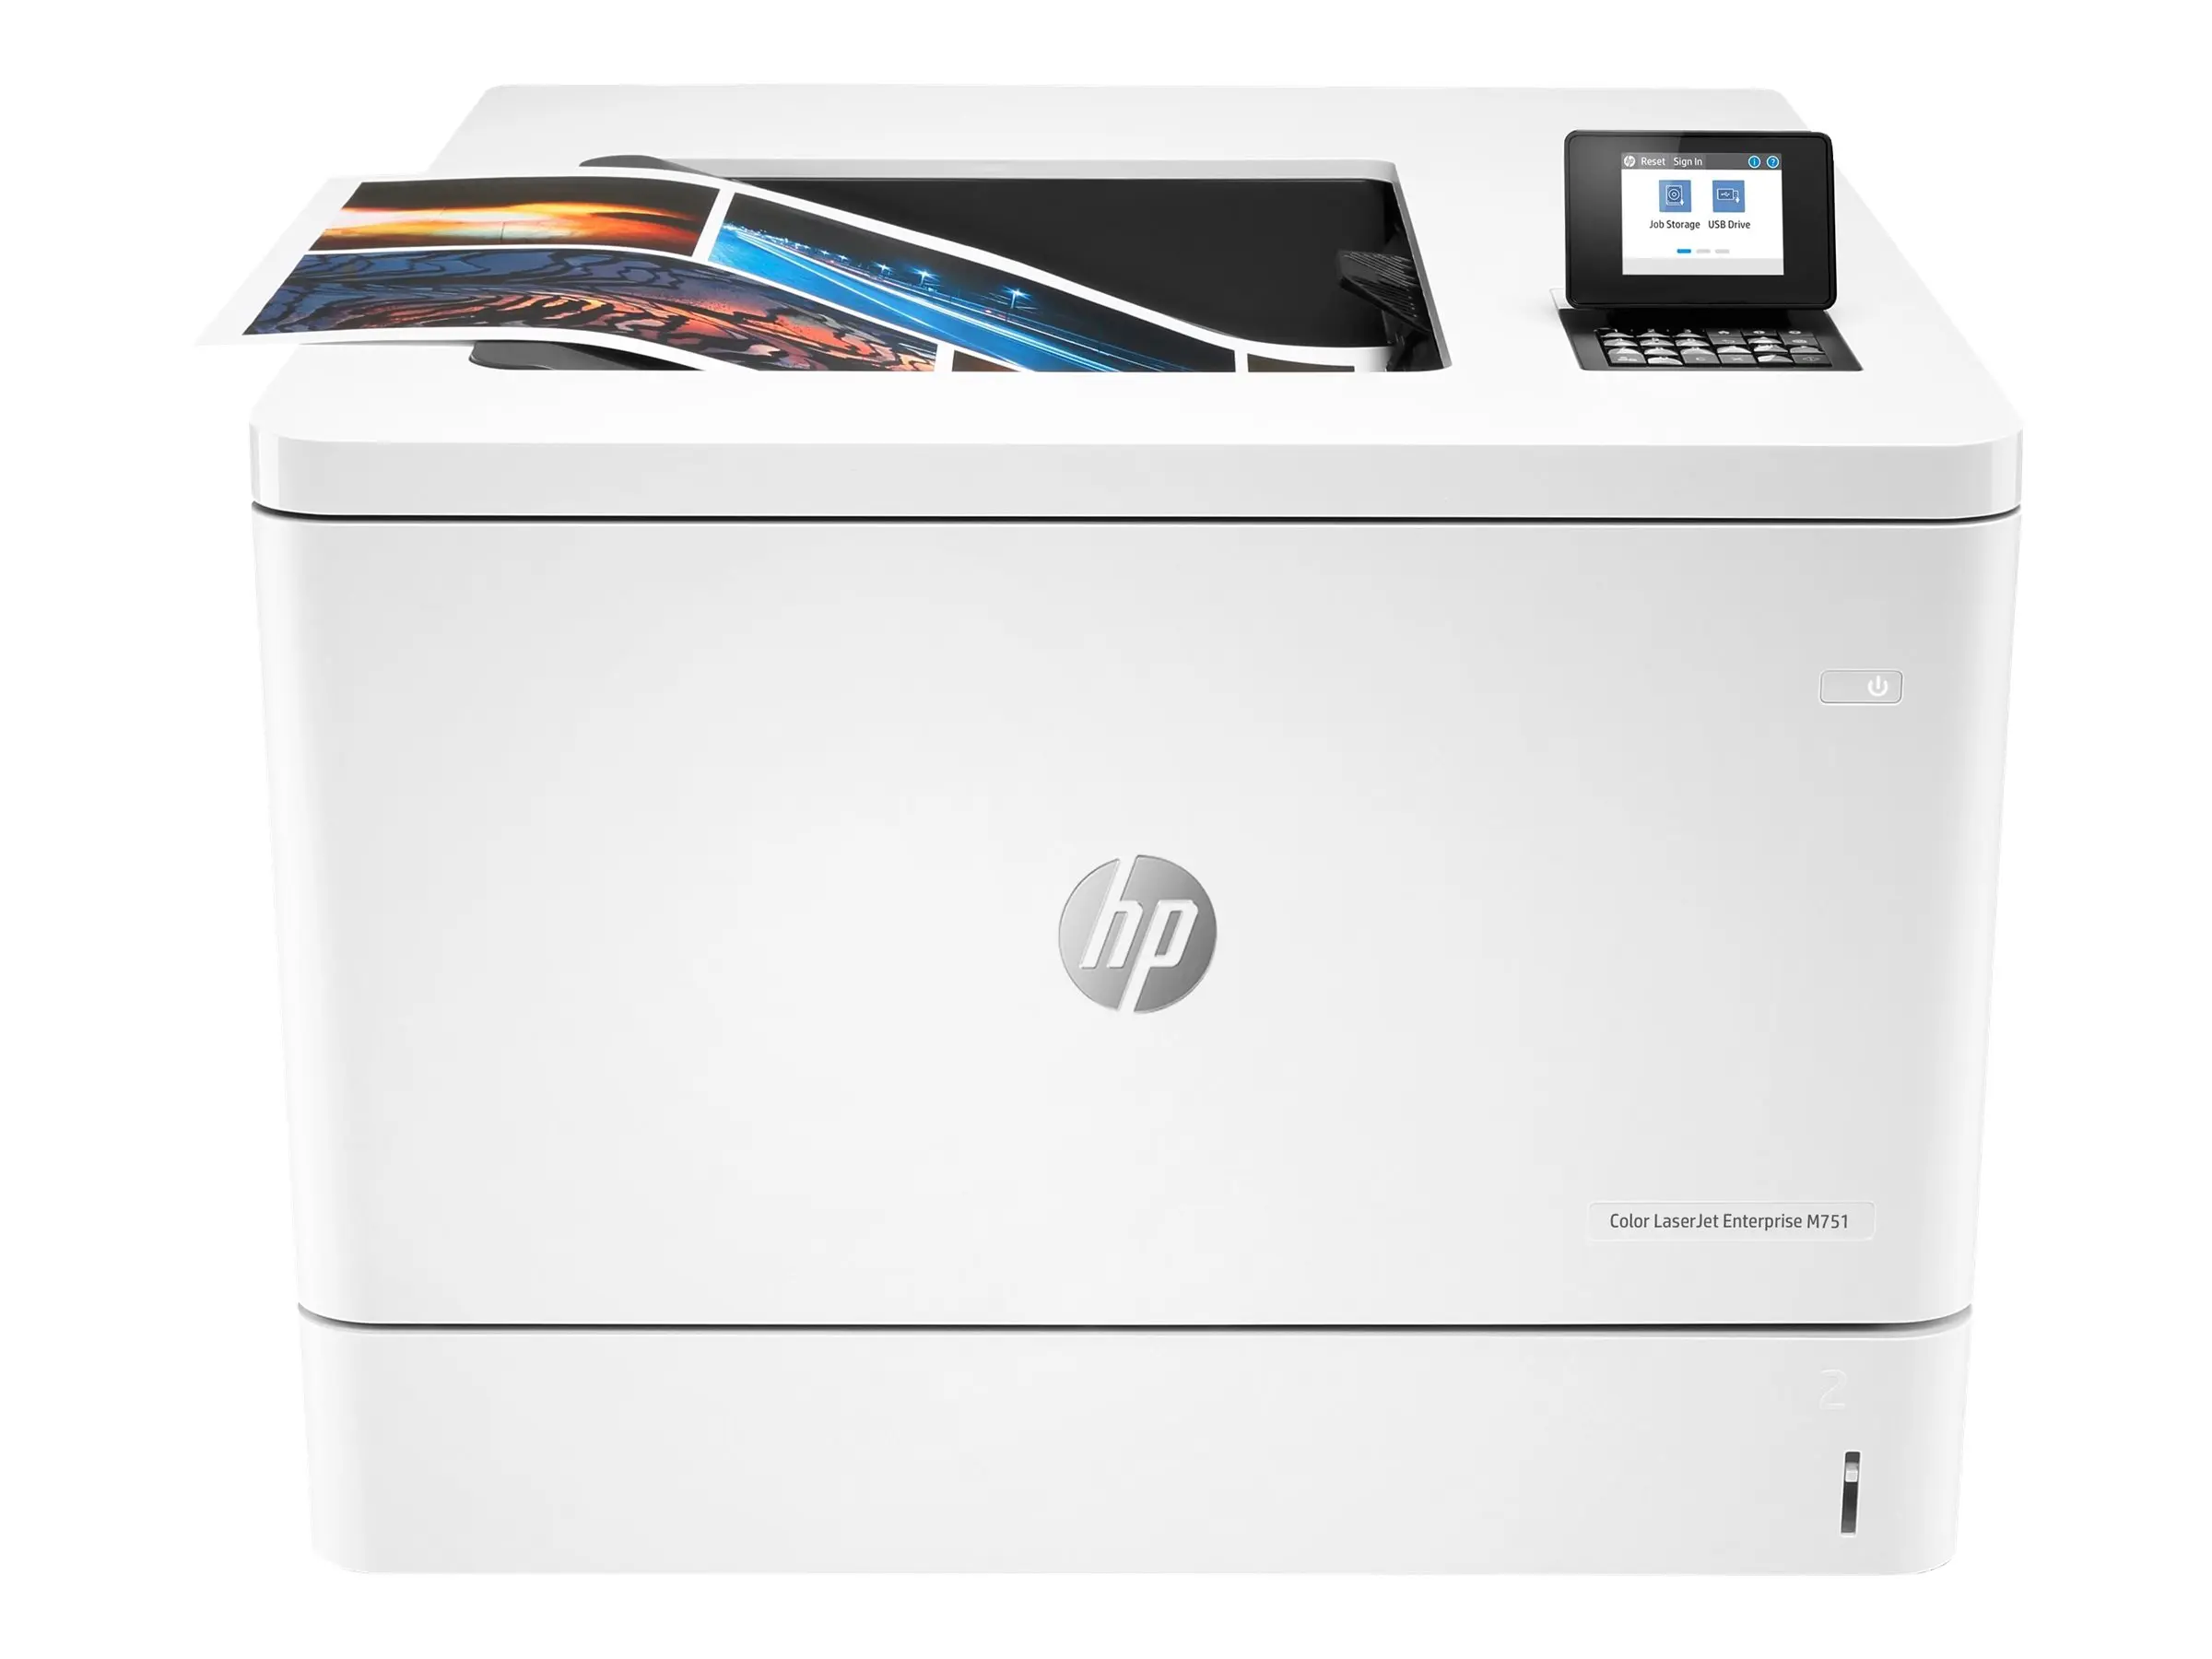 usb composite hewlett-packard hp laserjet - How do I print directly from USB on HP printer